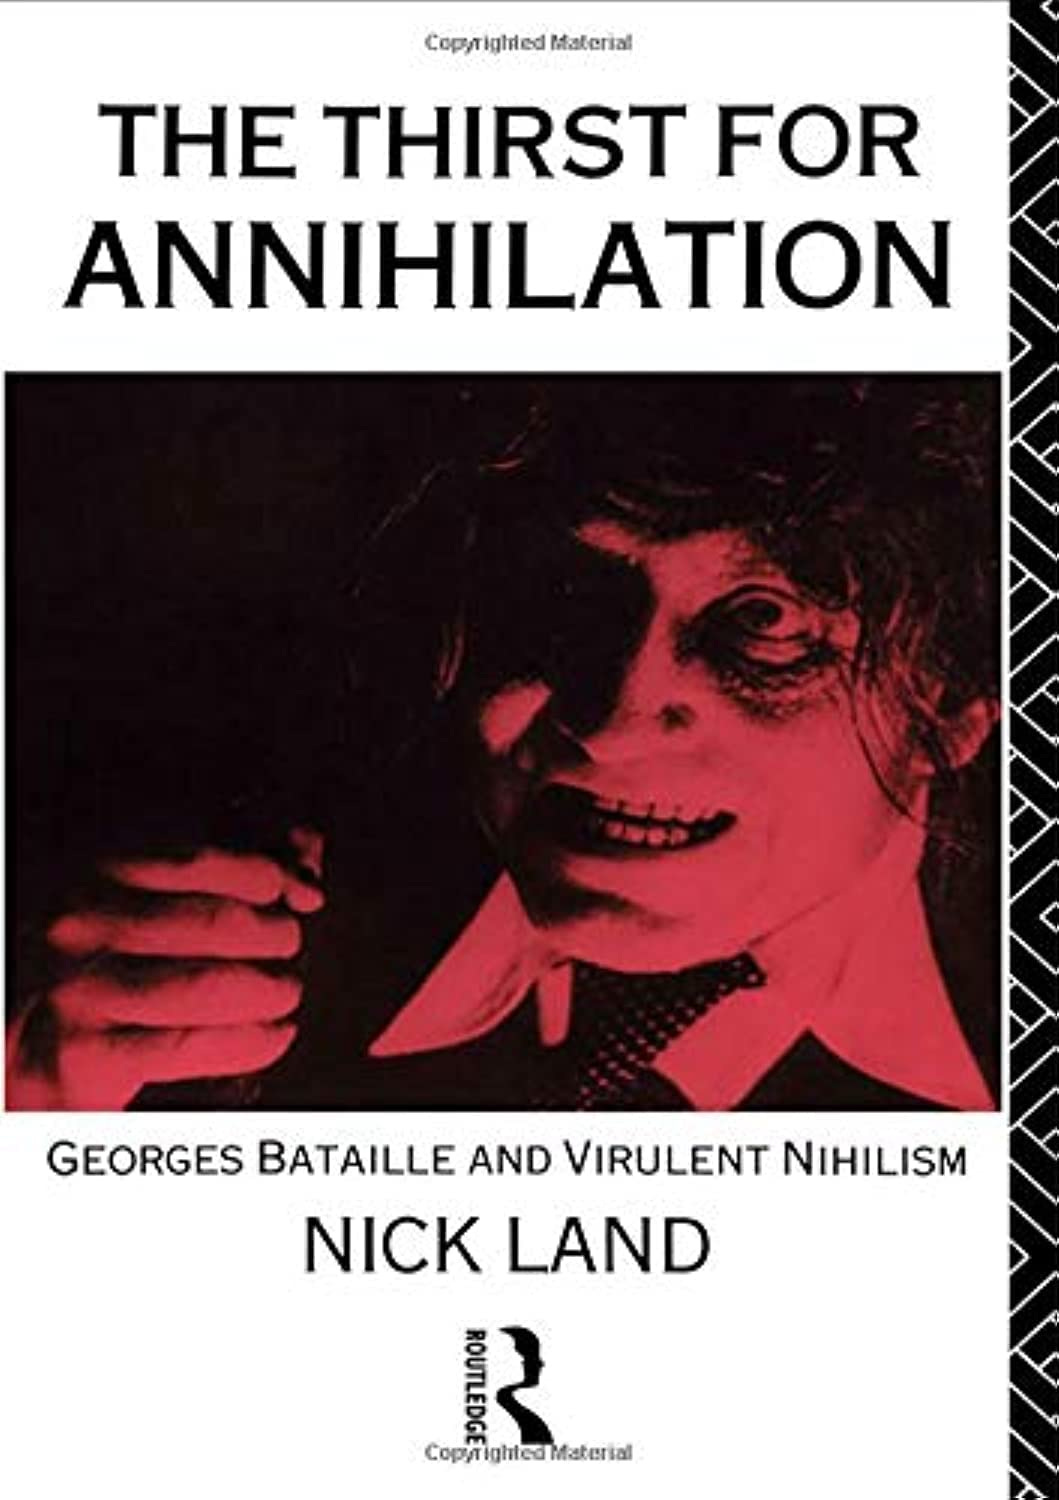 The Thirst for Annihilation: Georges Bataille and Virulent Nihilism : Land,  Nick: Amazon.ca: Books